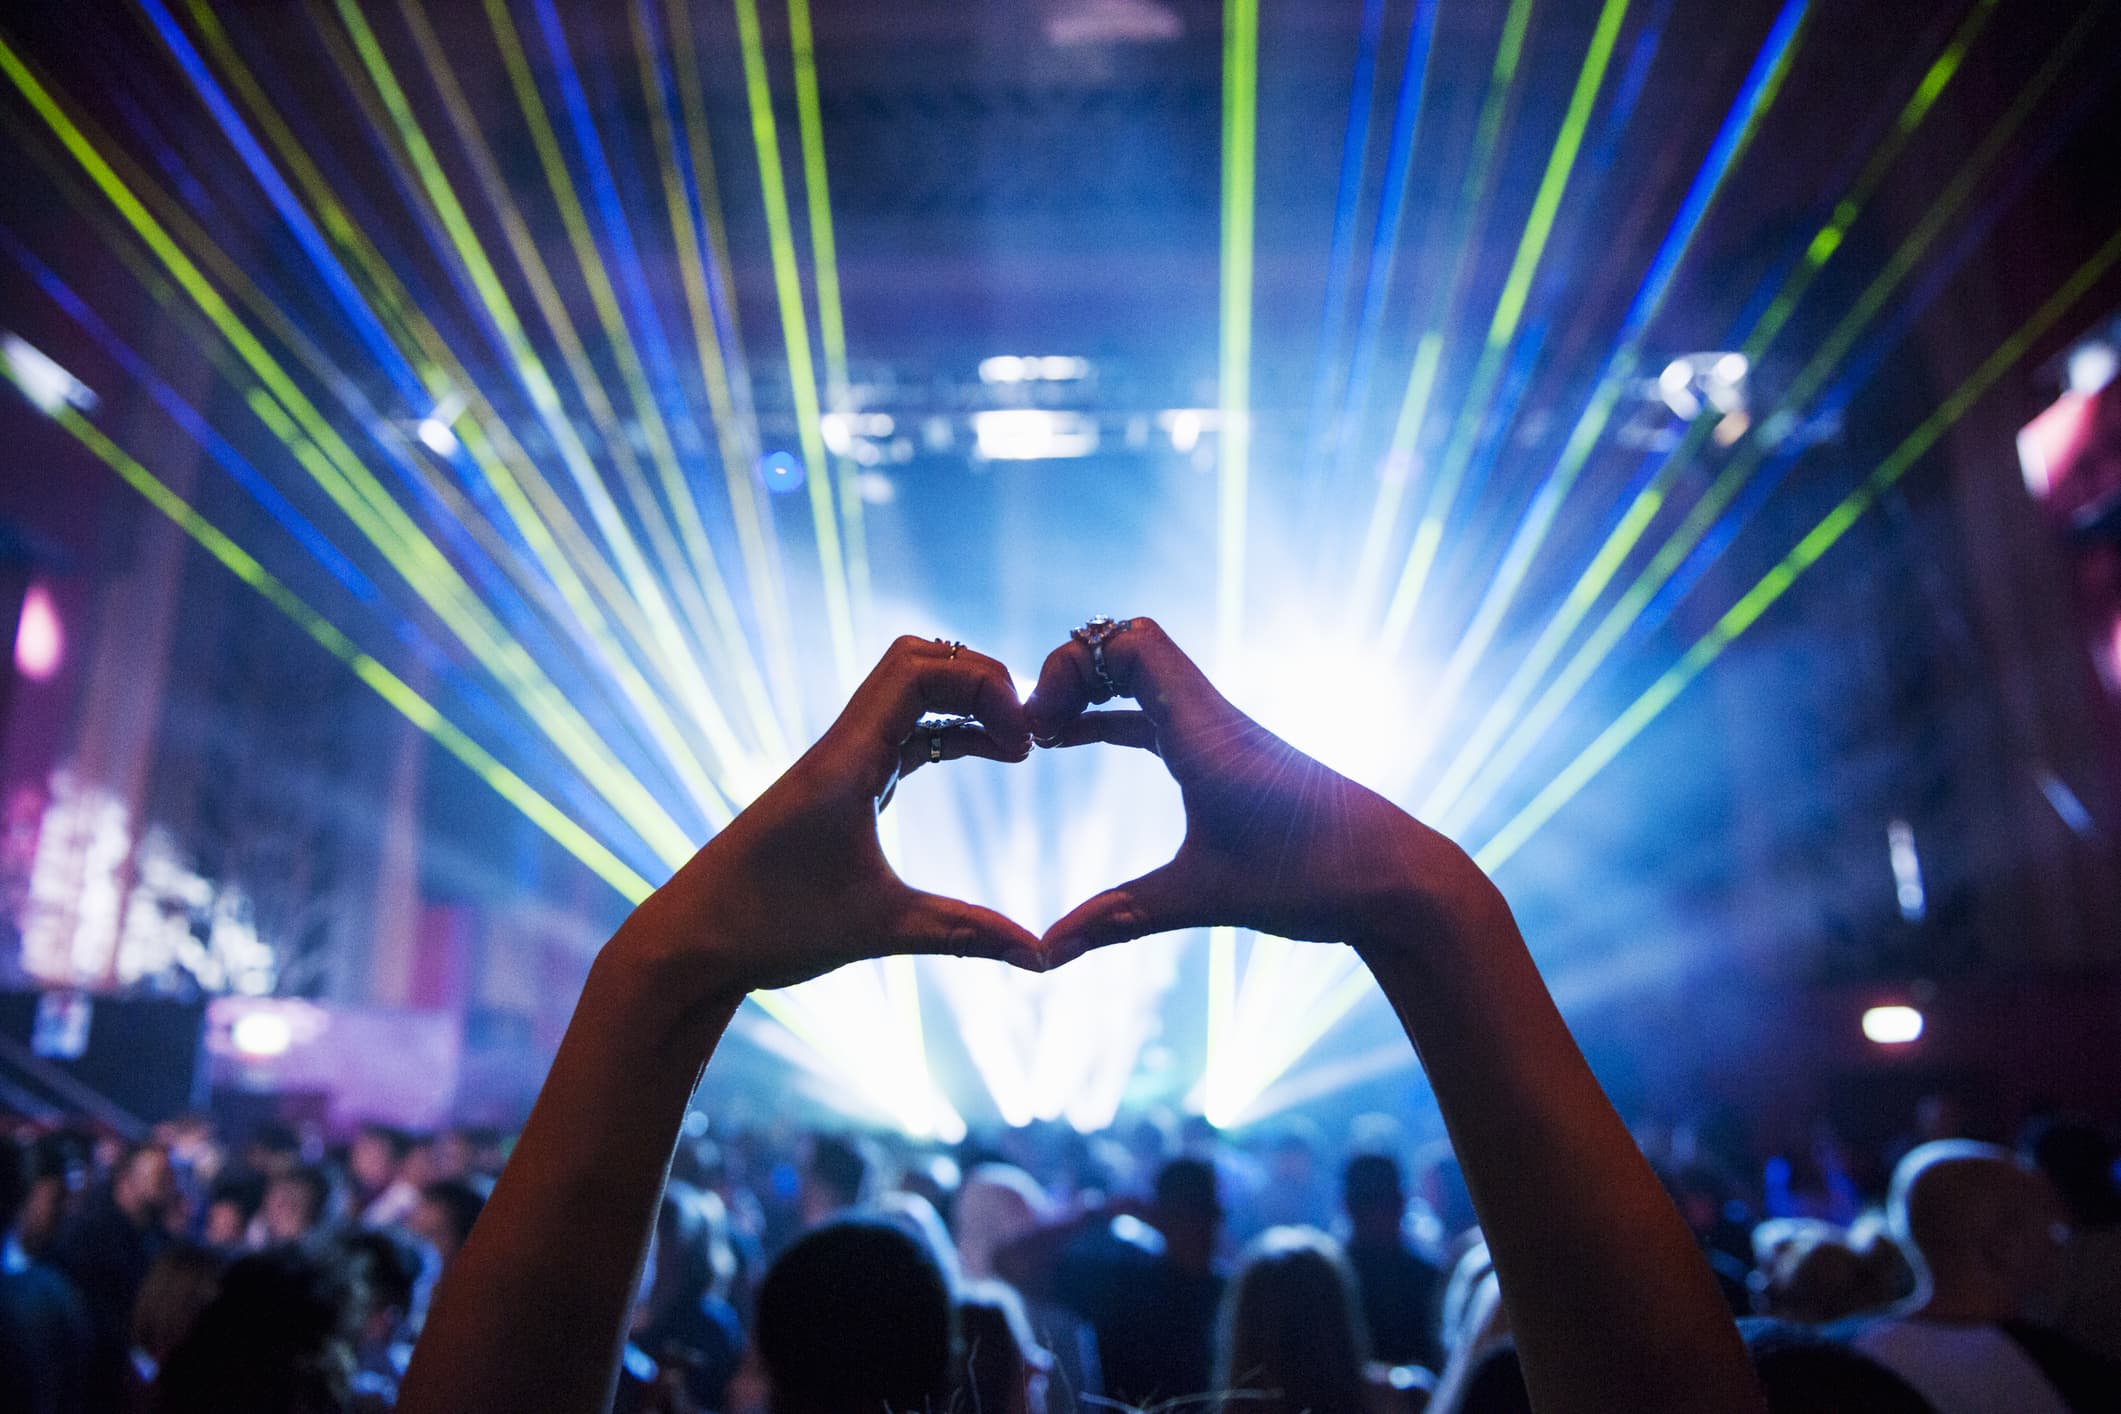 Woman making heart shape with hands at music event, as rays of light from the event lighting come out towards her in the audience